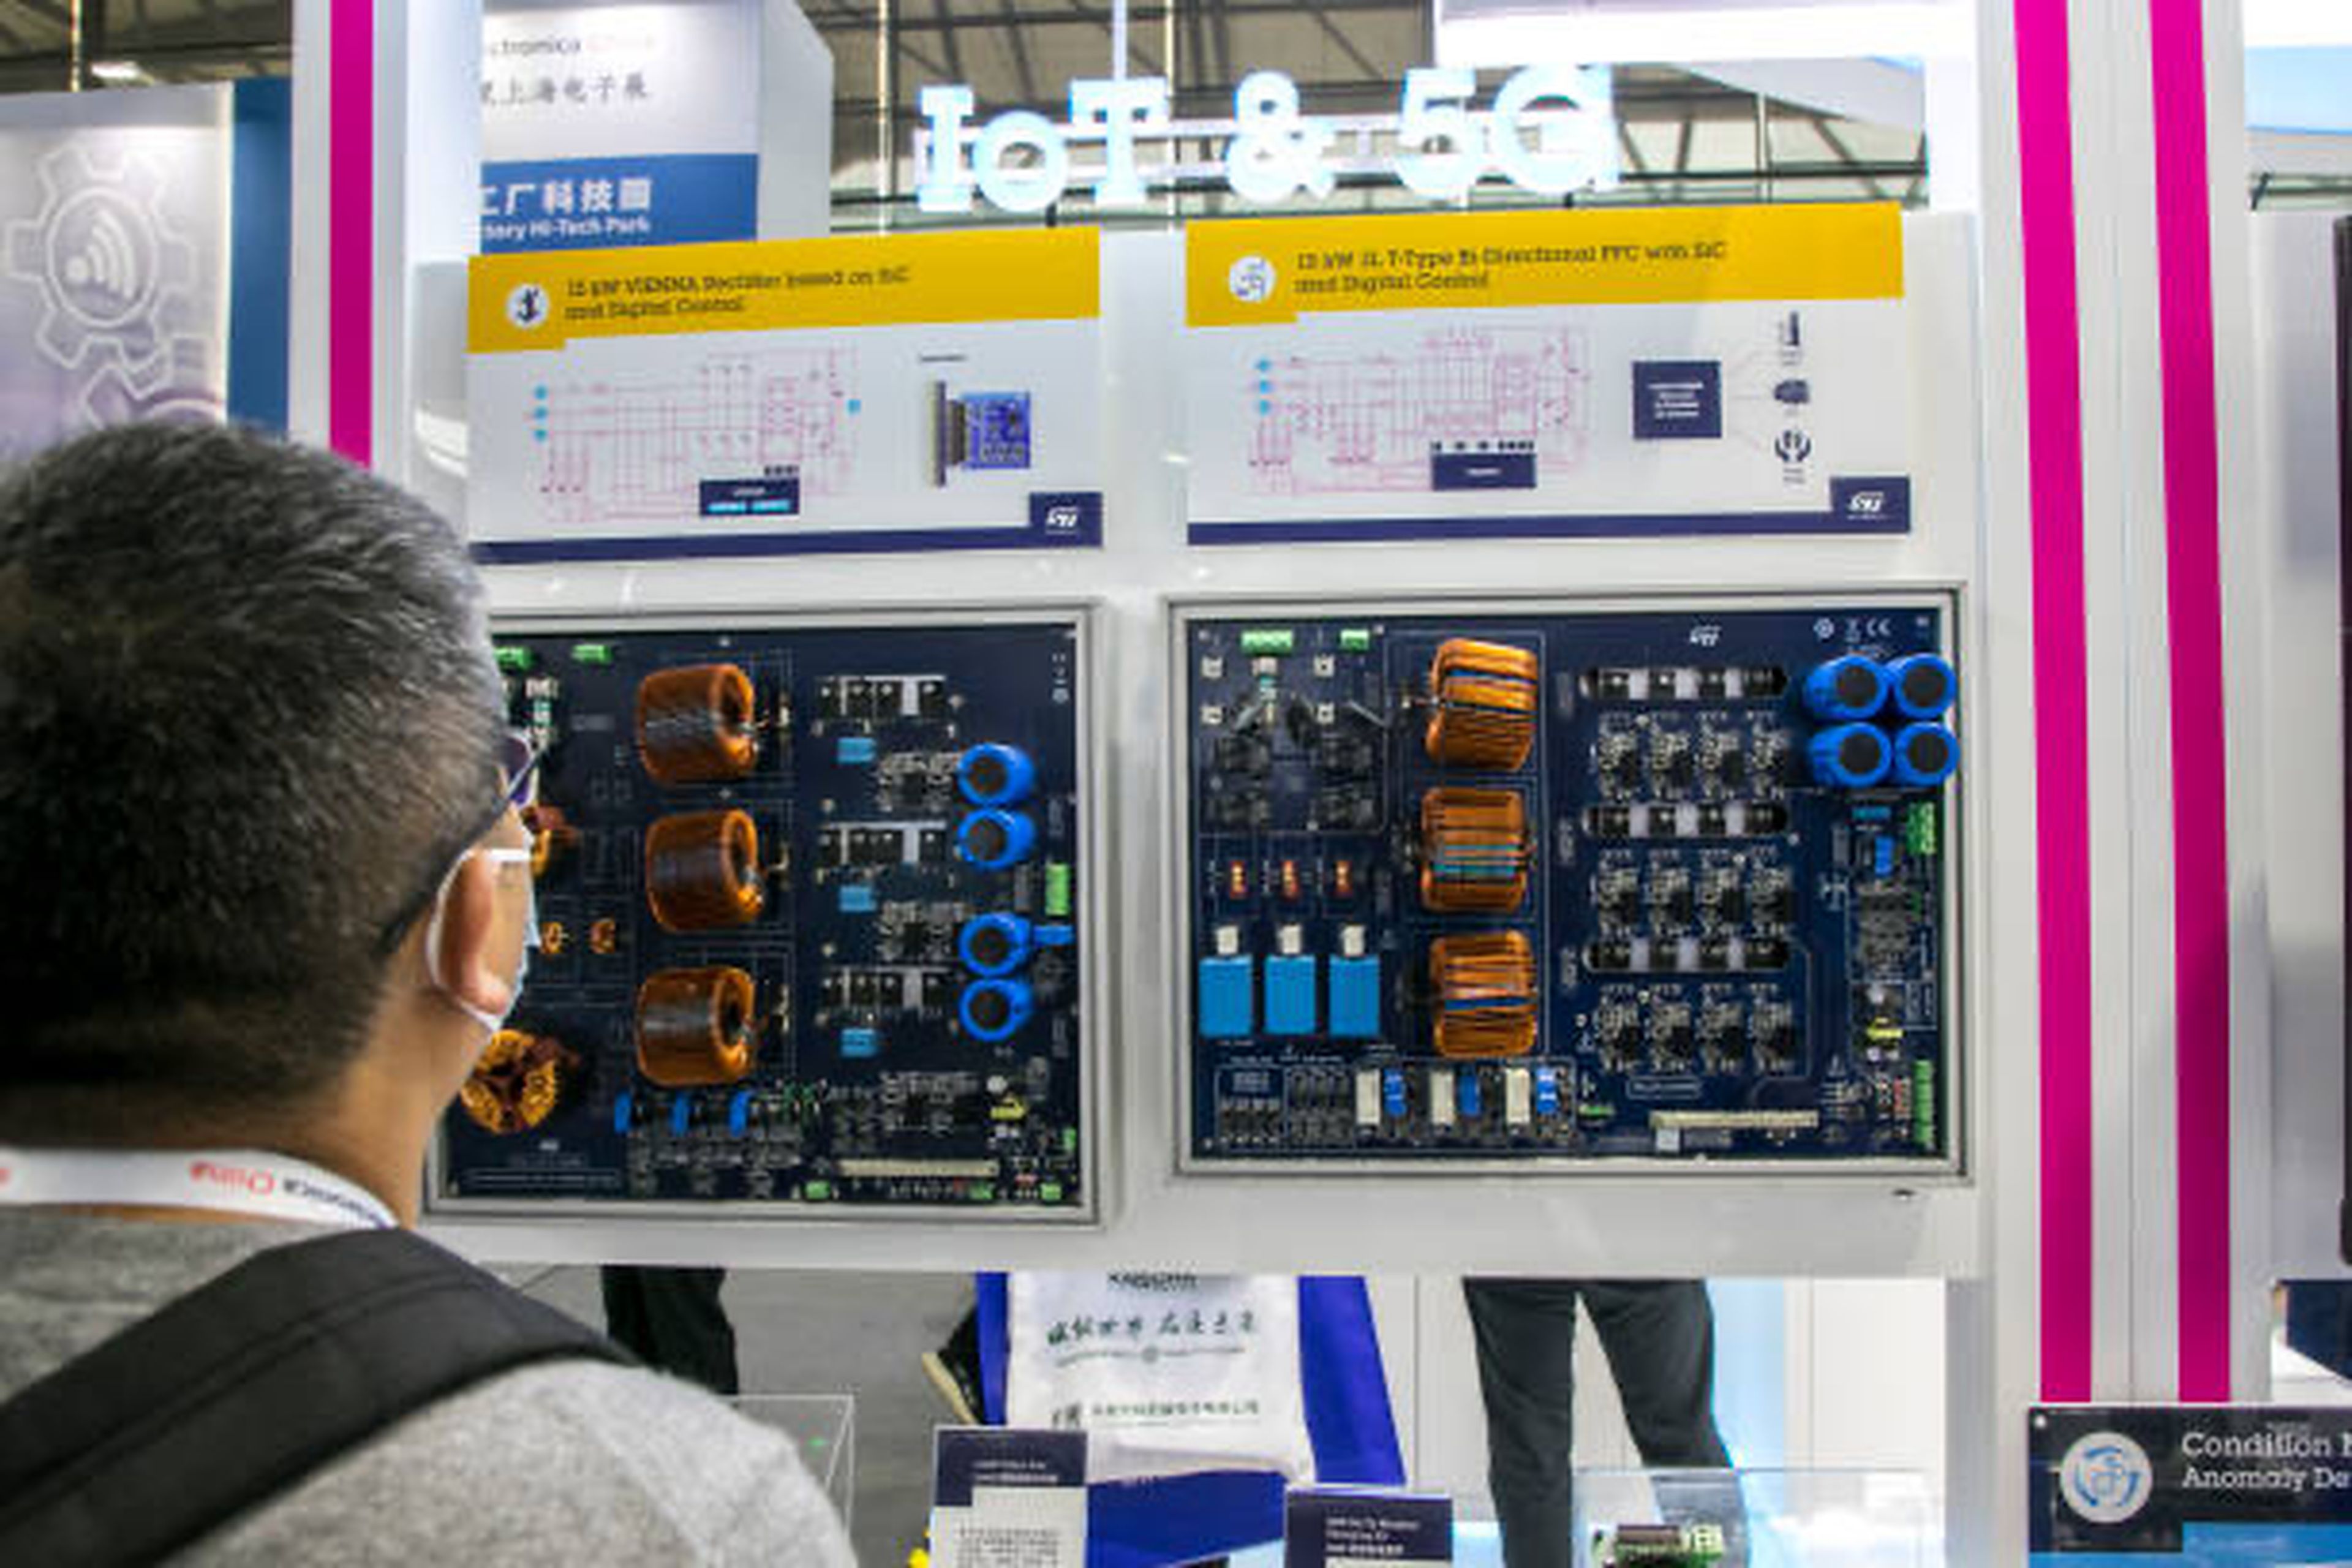 A visitor looks at an IoT &#038; 5G motherboard at the booth of STMicroelectronics during Electronica China 2021 at Shanghai New International Expo Centre on April 14, 2021 in Shanghai, China. (Photo by VCG/VCG via Getty Images)